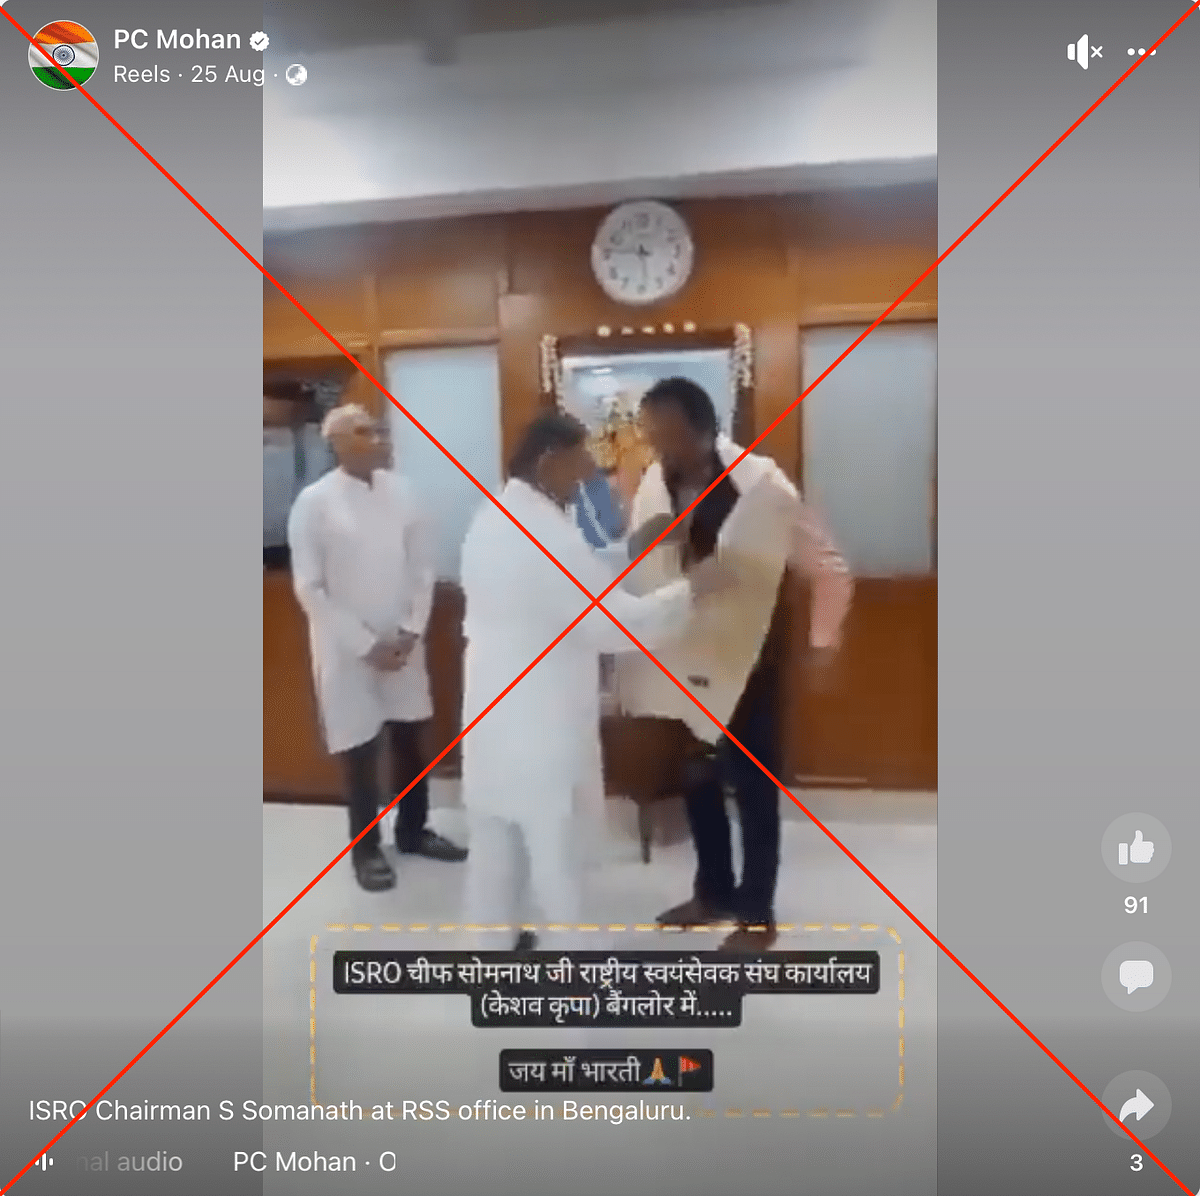 The video shows S Somanath at an NGO in Bengaluru and it was taken a month before Chandrayaan-3 landed on the moon.